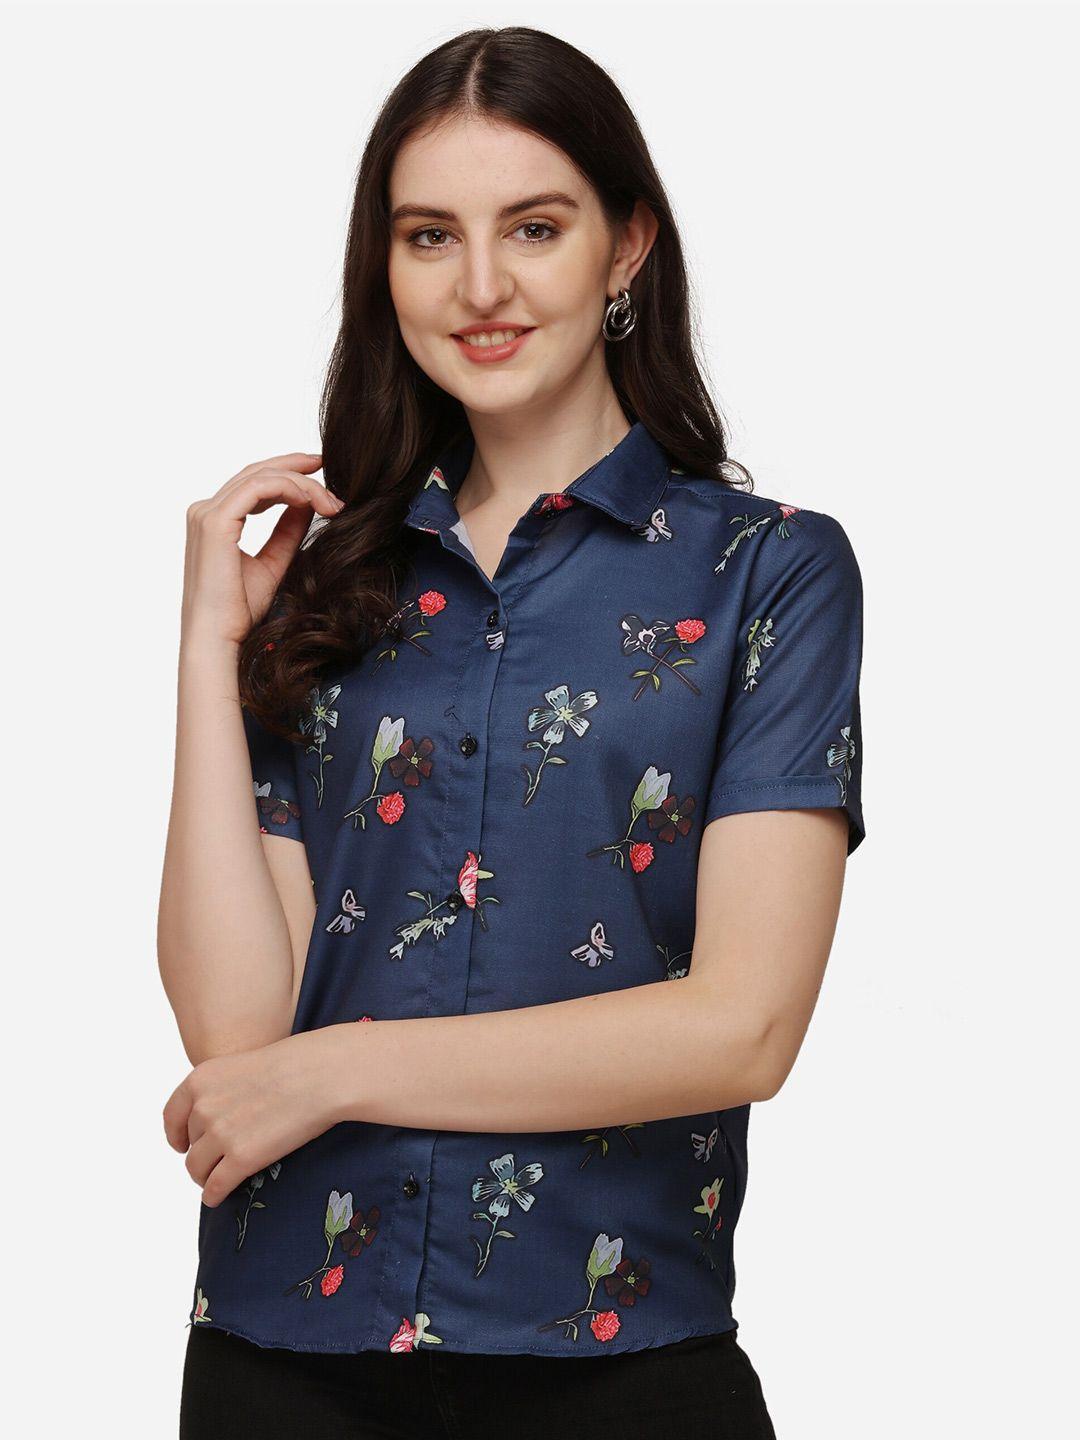 getchi women comfort floral opaque printed party shirt